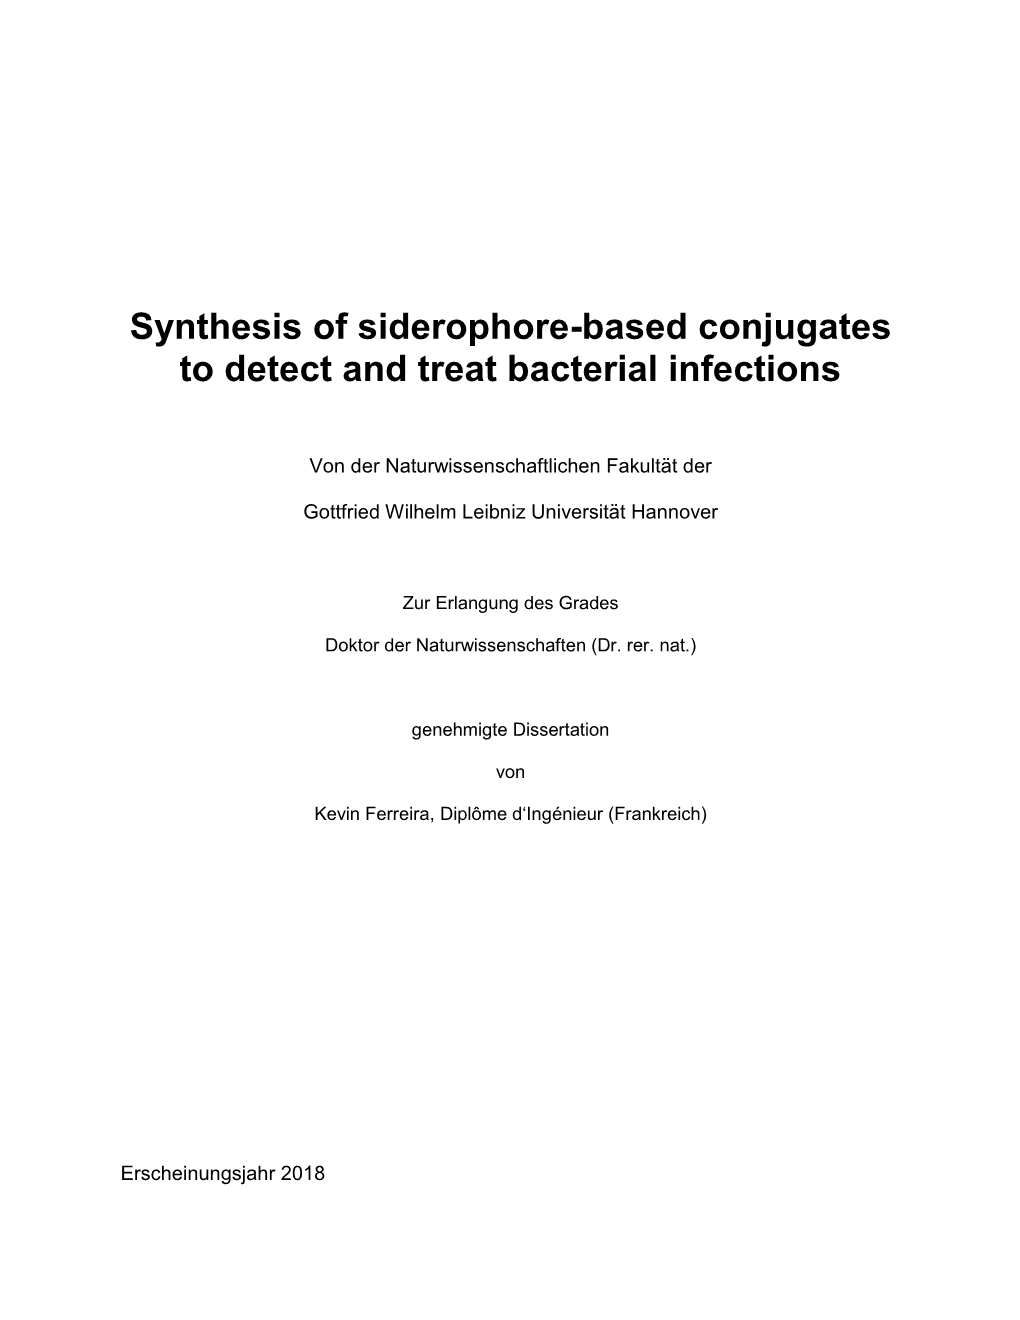 Synthesis of Siderophore-Based Conjugates to Detect and Treat Bacterial Infections